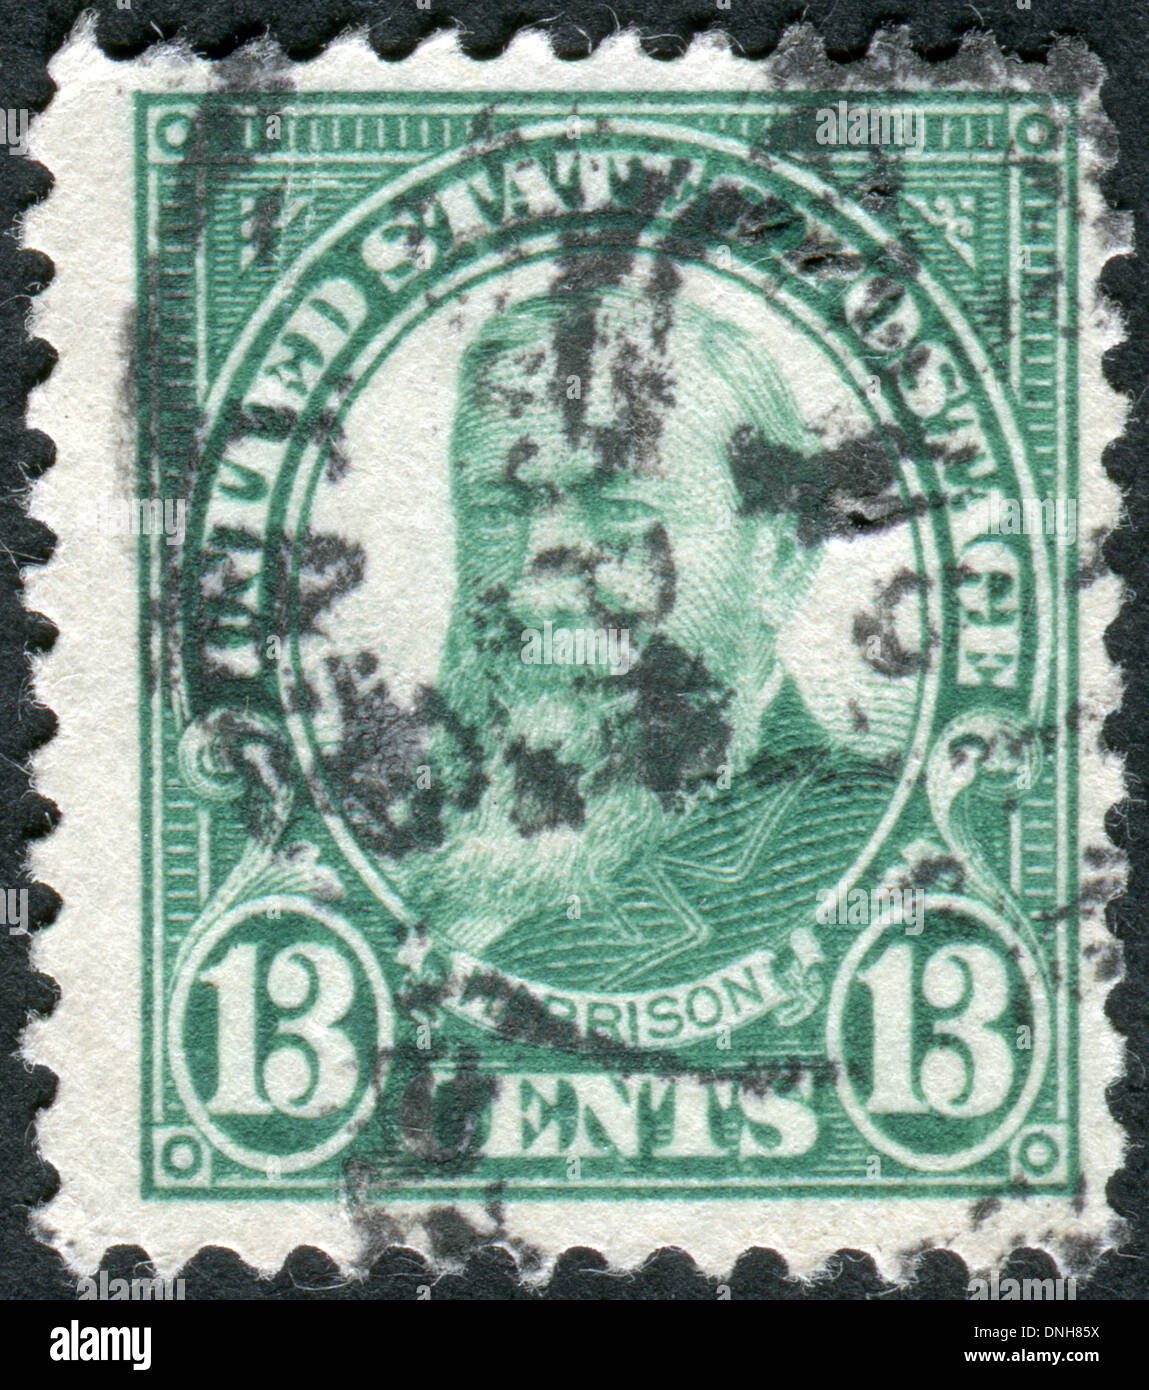 Postage stamp printed in USA, shows a portrait 23rd President of the United States, Benjamin Harrison Stock Photo